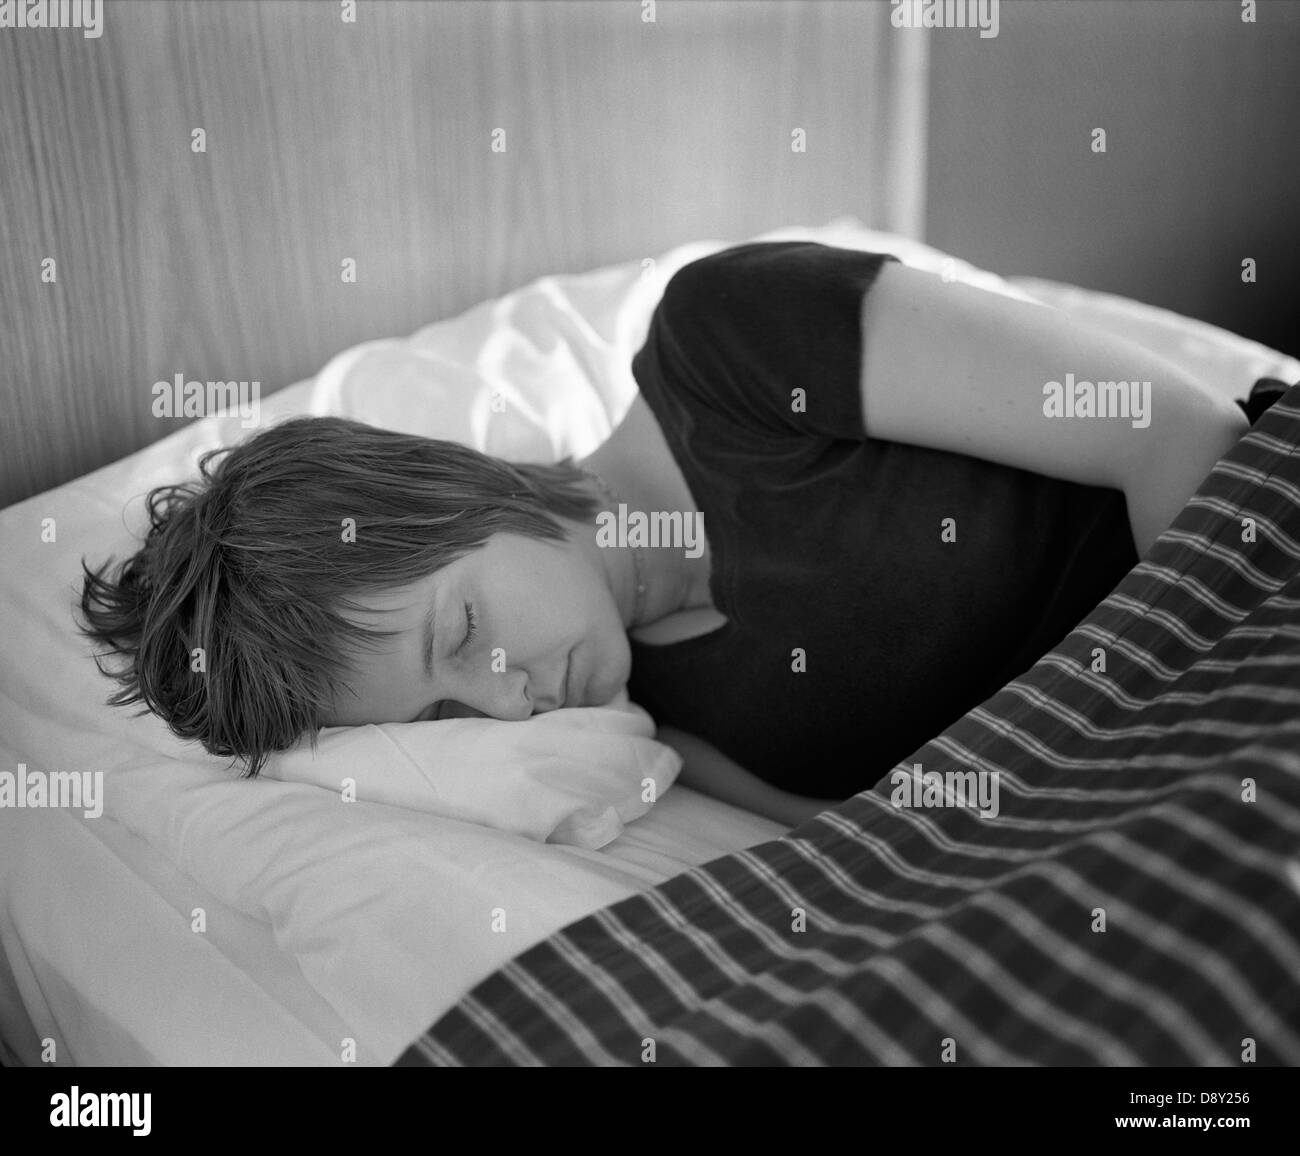 Tired bed not happy Black and White Stock Photos & Images - Alamy